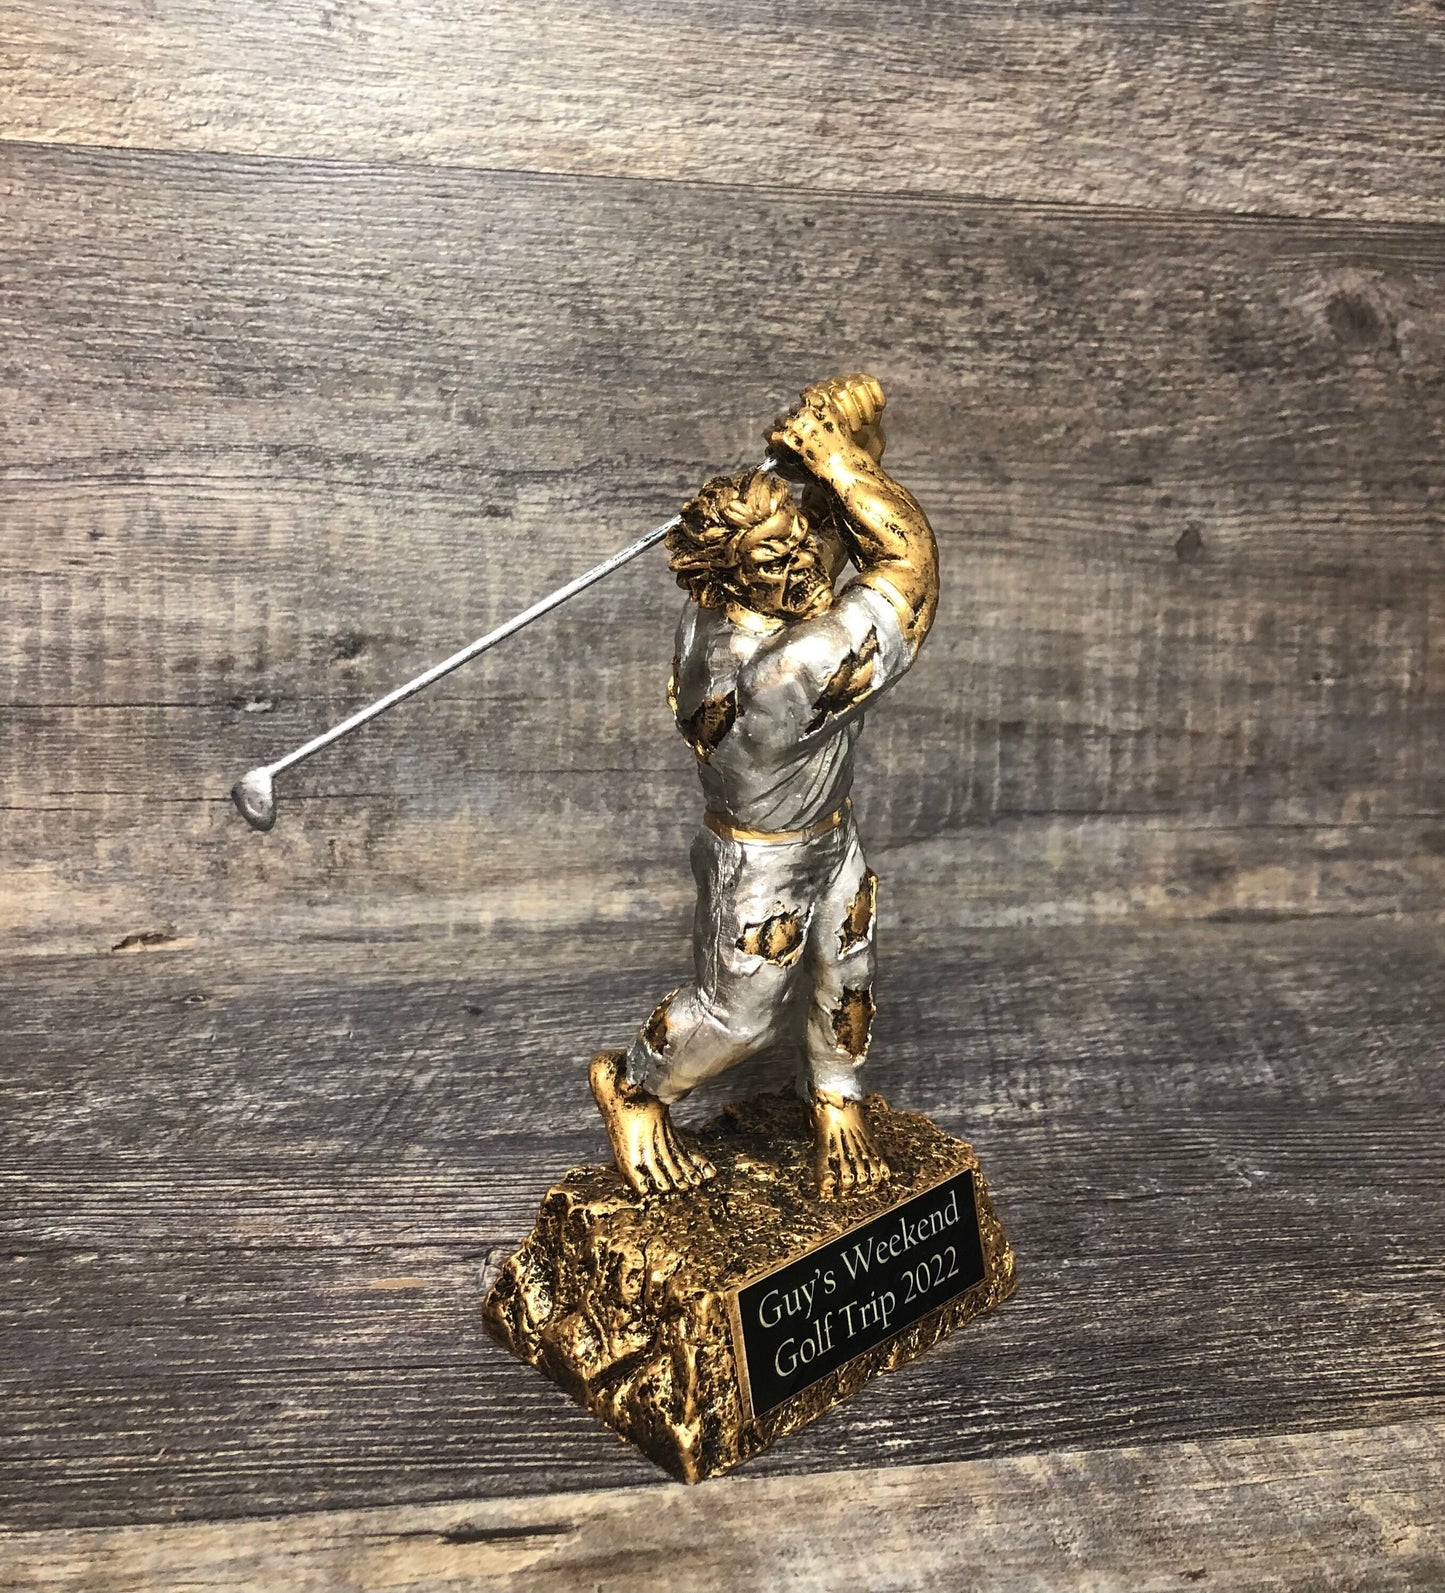 Golf Trophy Tournament Beast Trophy Classic Golf Charity Event Trophy Hole In One Under Par Beast Bragging Right Best Score Guys Weekend